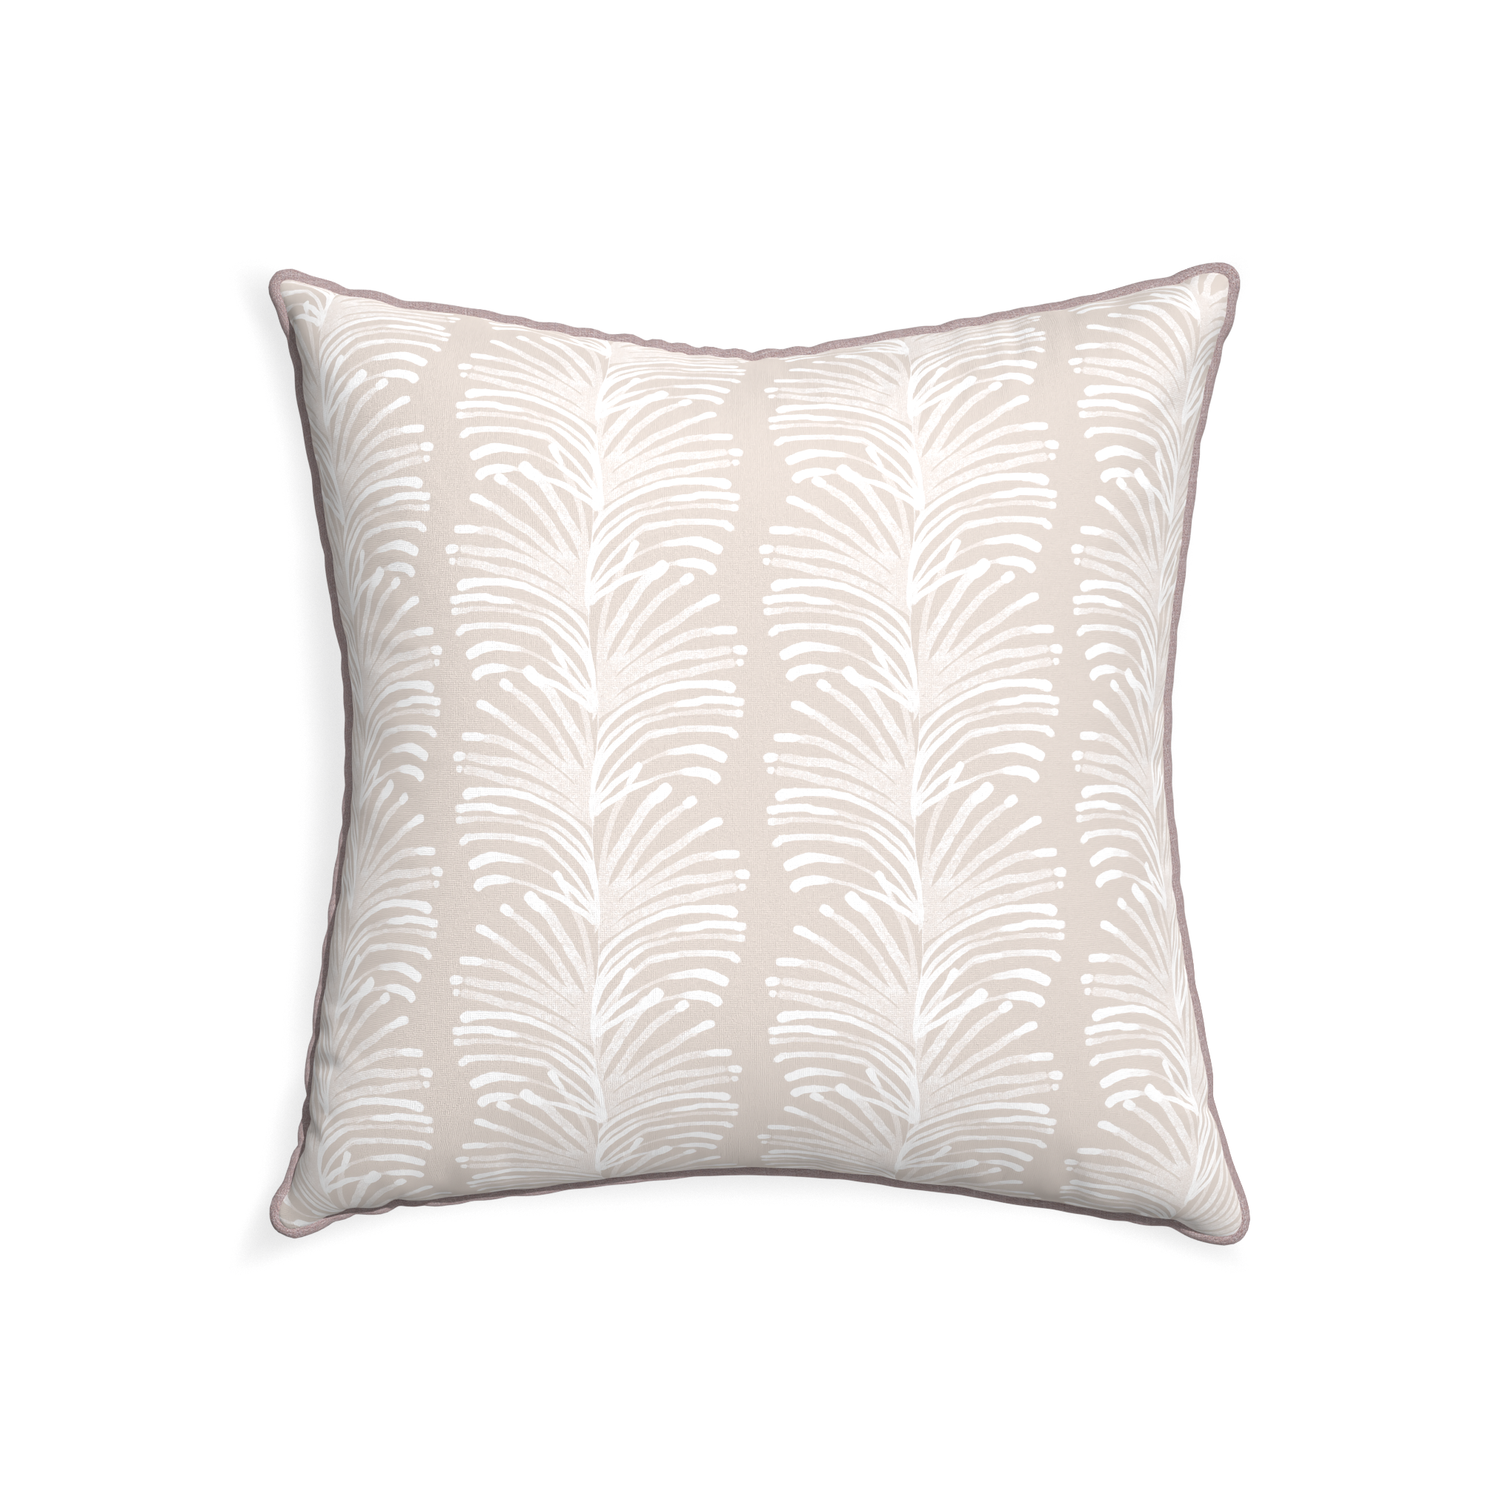 22-square emma sand custom sand colored botanical stripepillow with orchid piping on white background